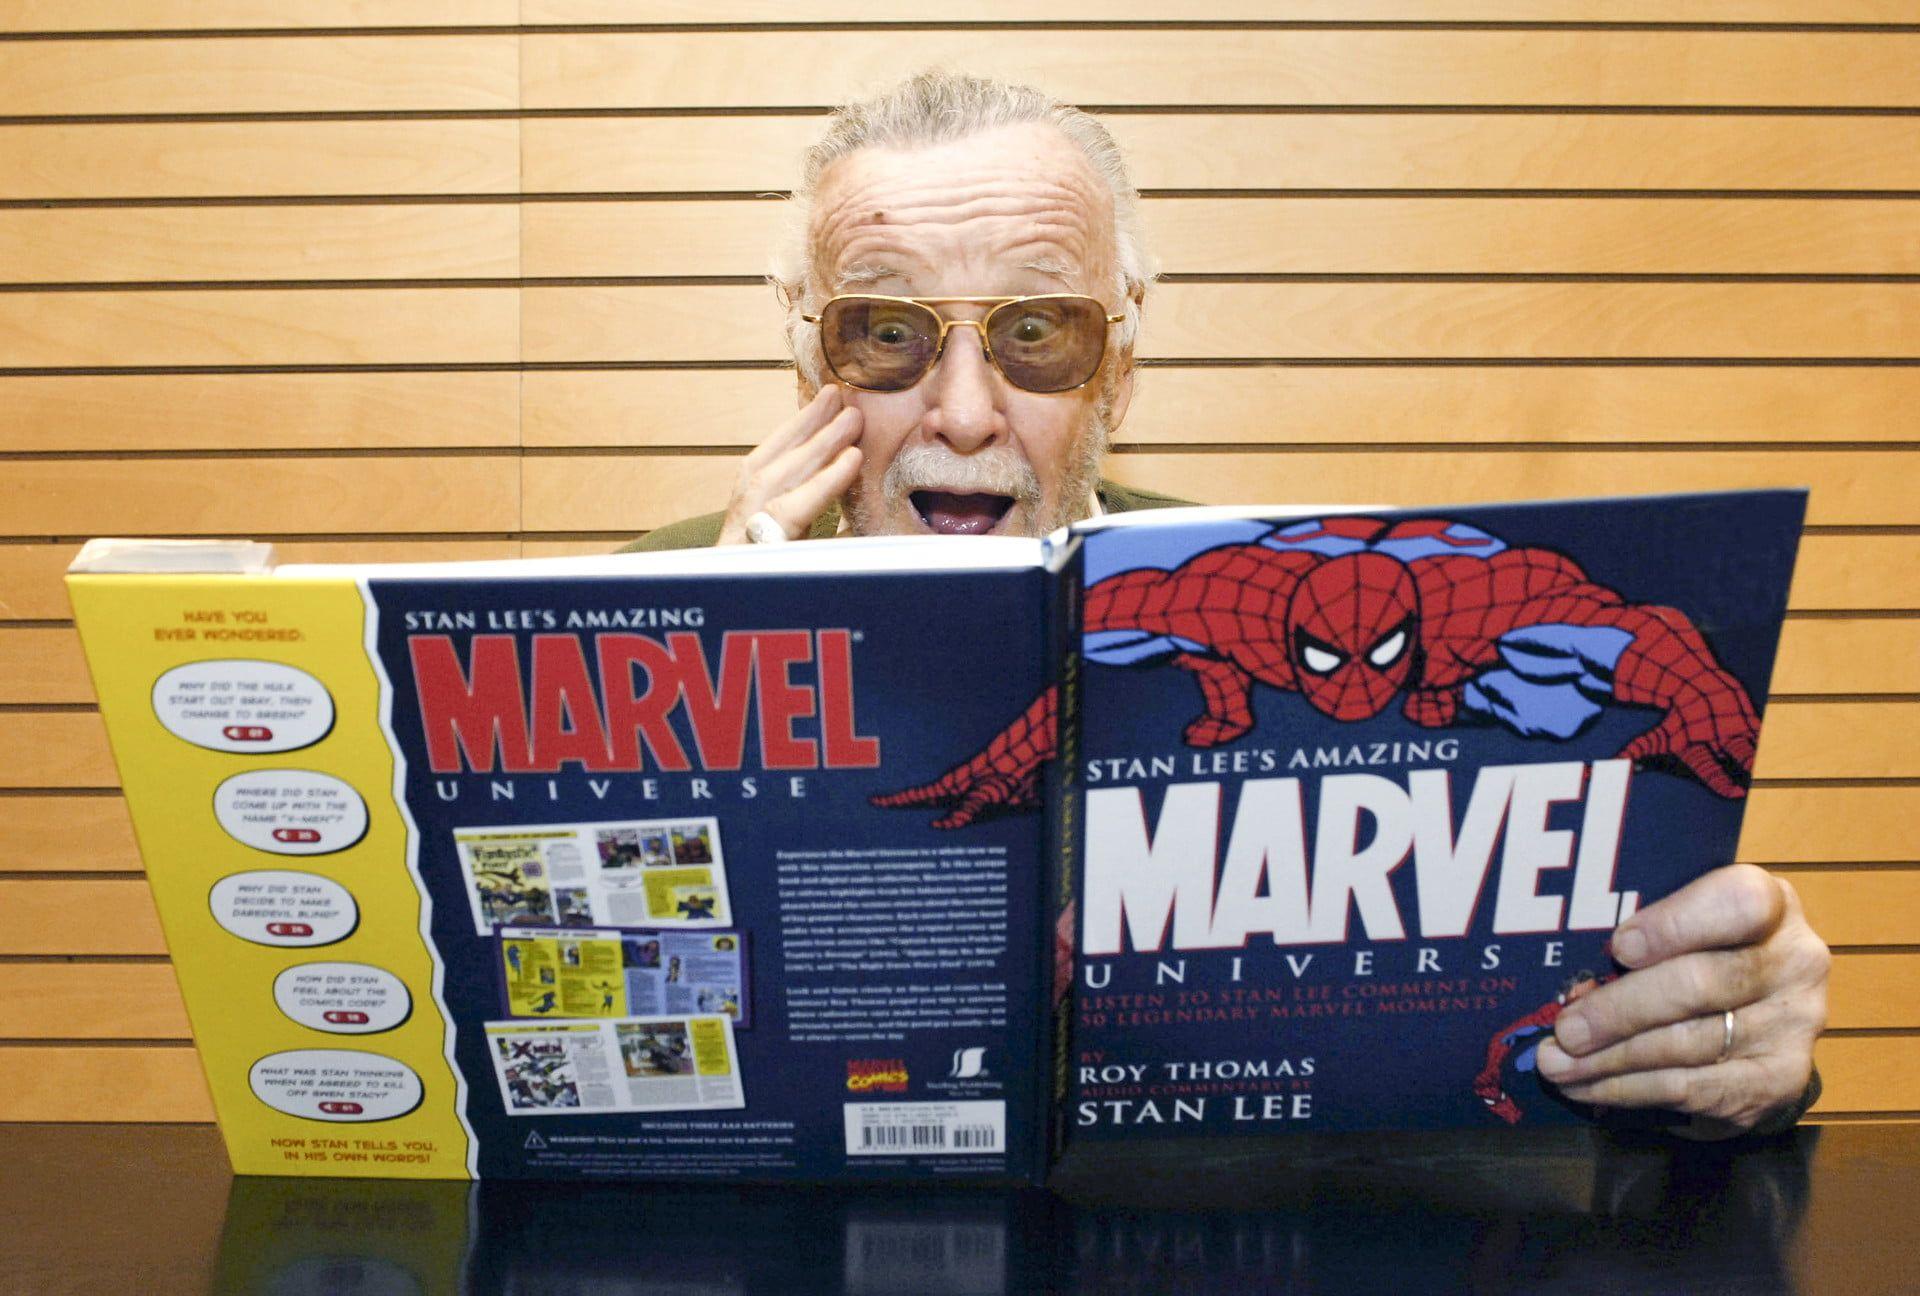 Stan Lee Marvel Logo - He created comics, movies, and superheroes. But Stan Lee lived